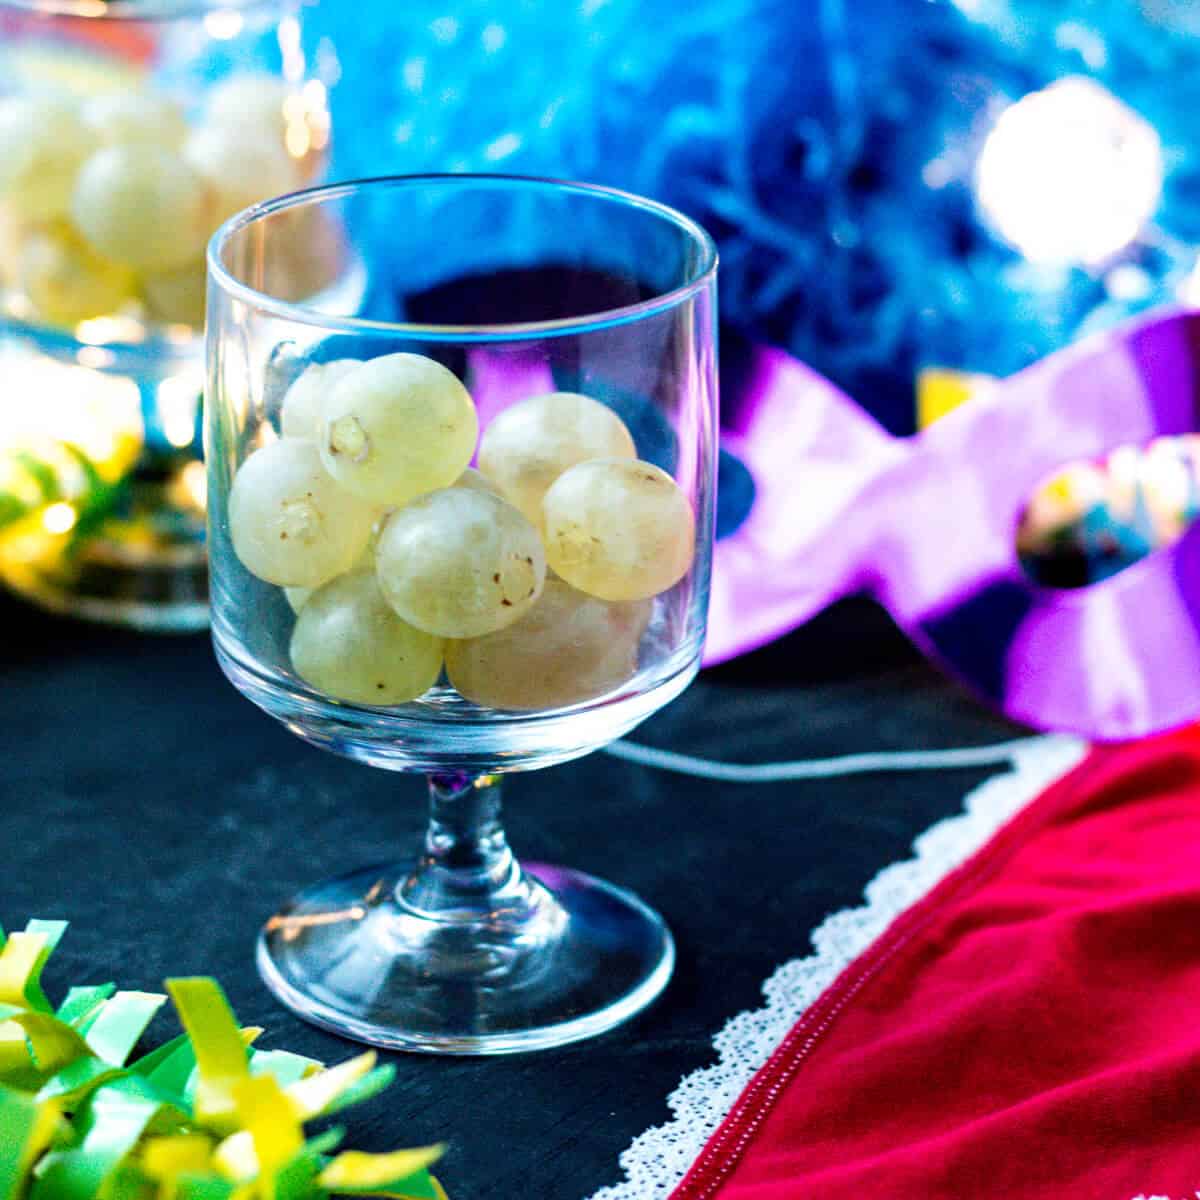 Twelve grapes in a glass next to red underwear and party favors, ready for celebrating New Year's in Spain.